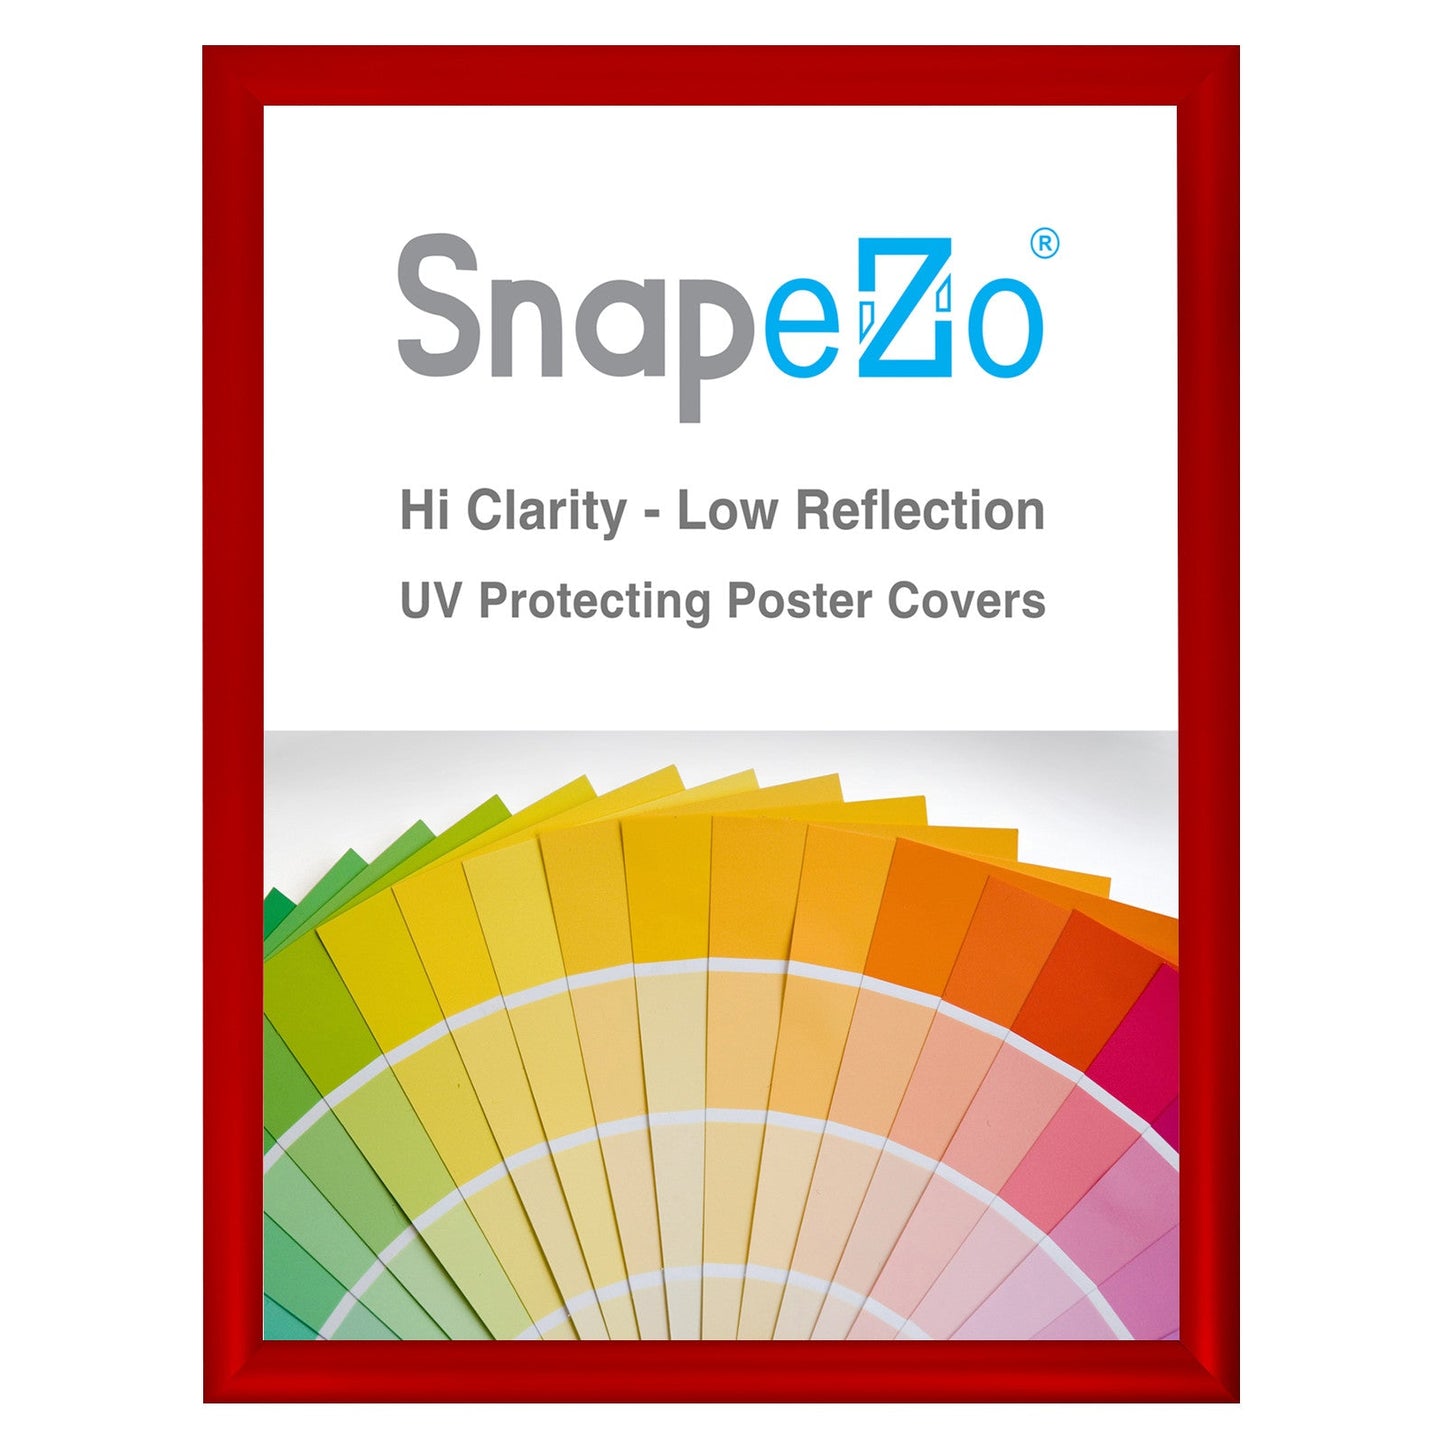 13x17 Red SnapeZo® Snap Frame - 1.2" Profile